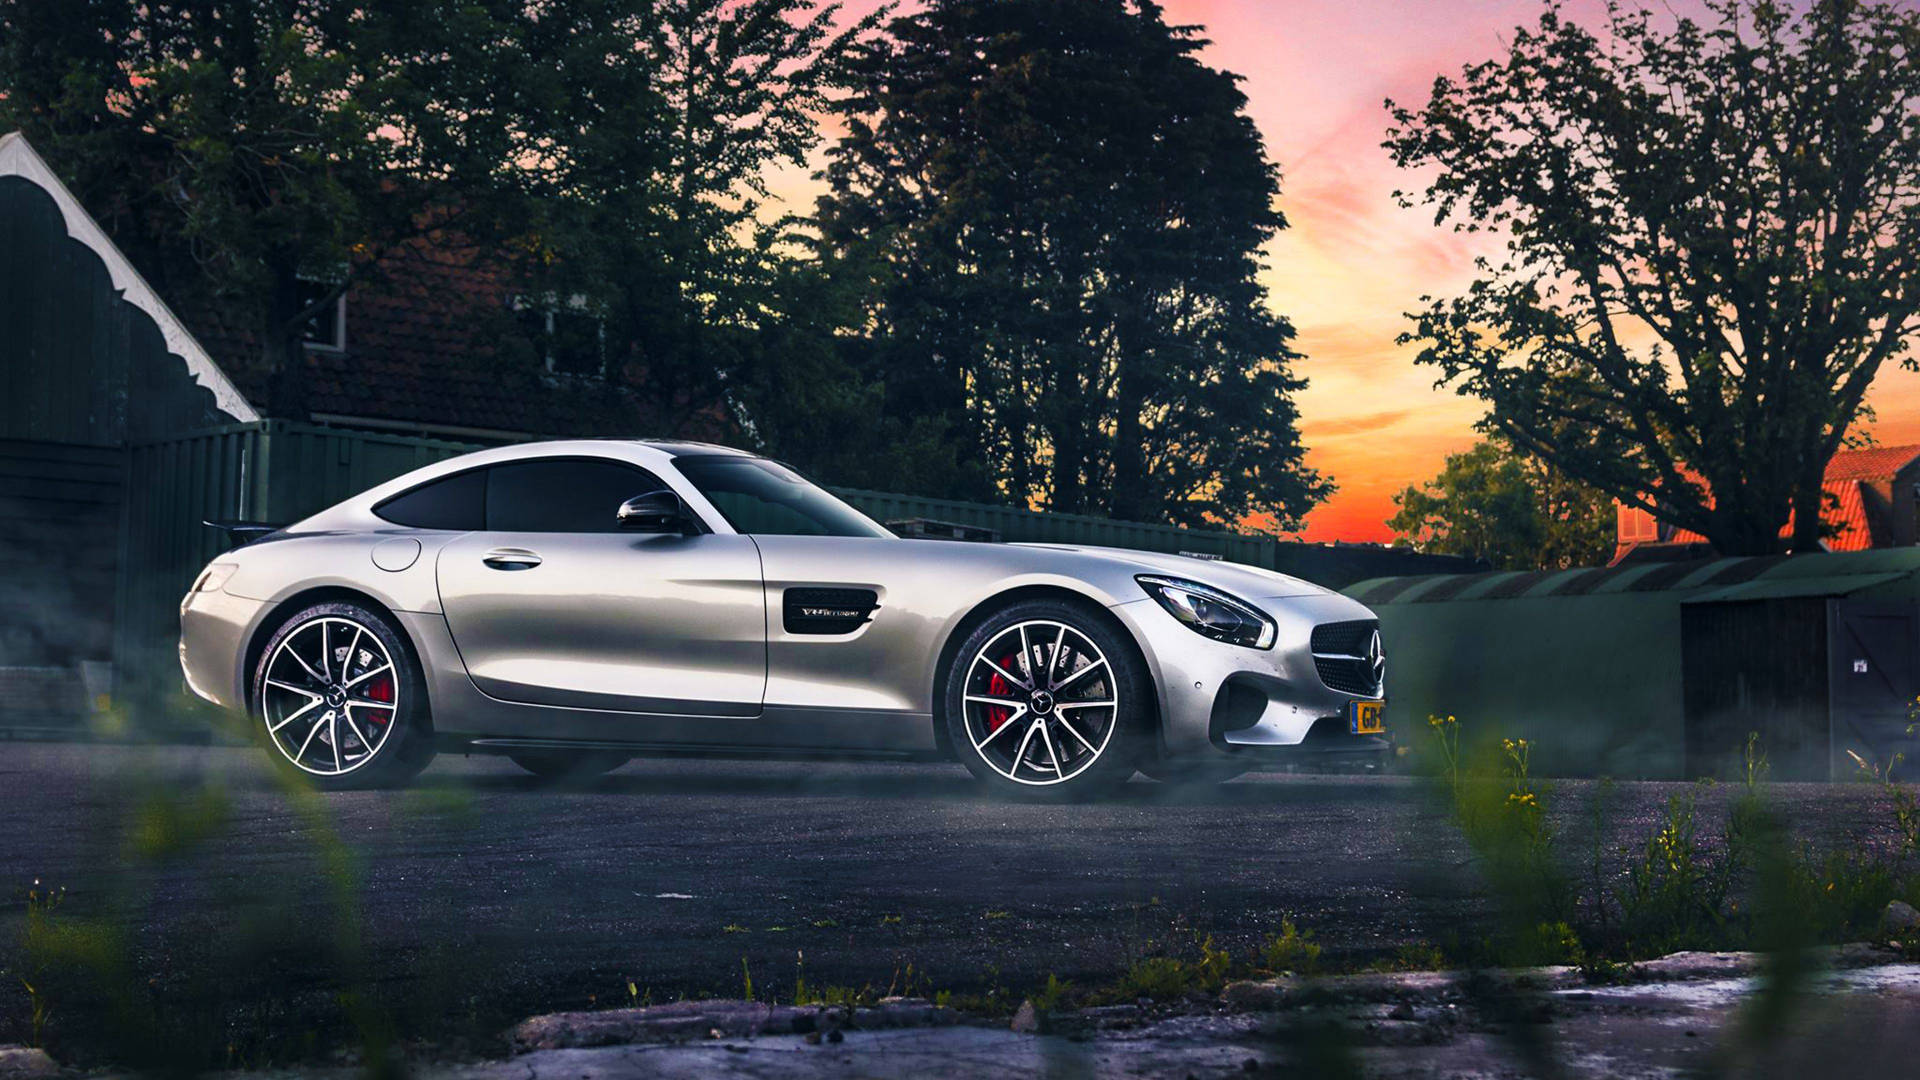 Sunset And Amg Gt R Background